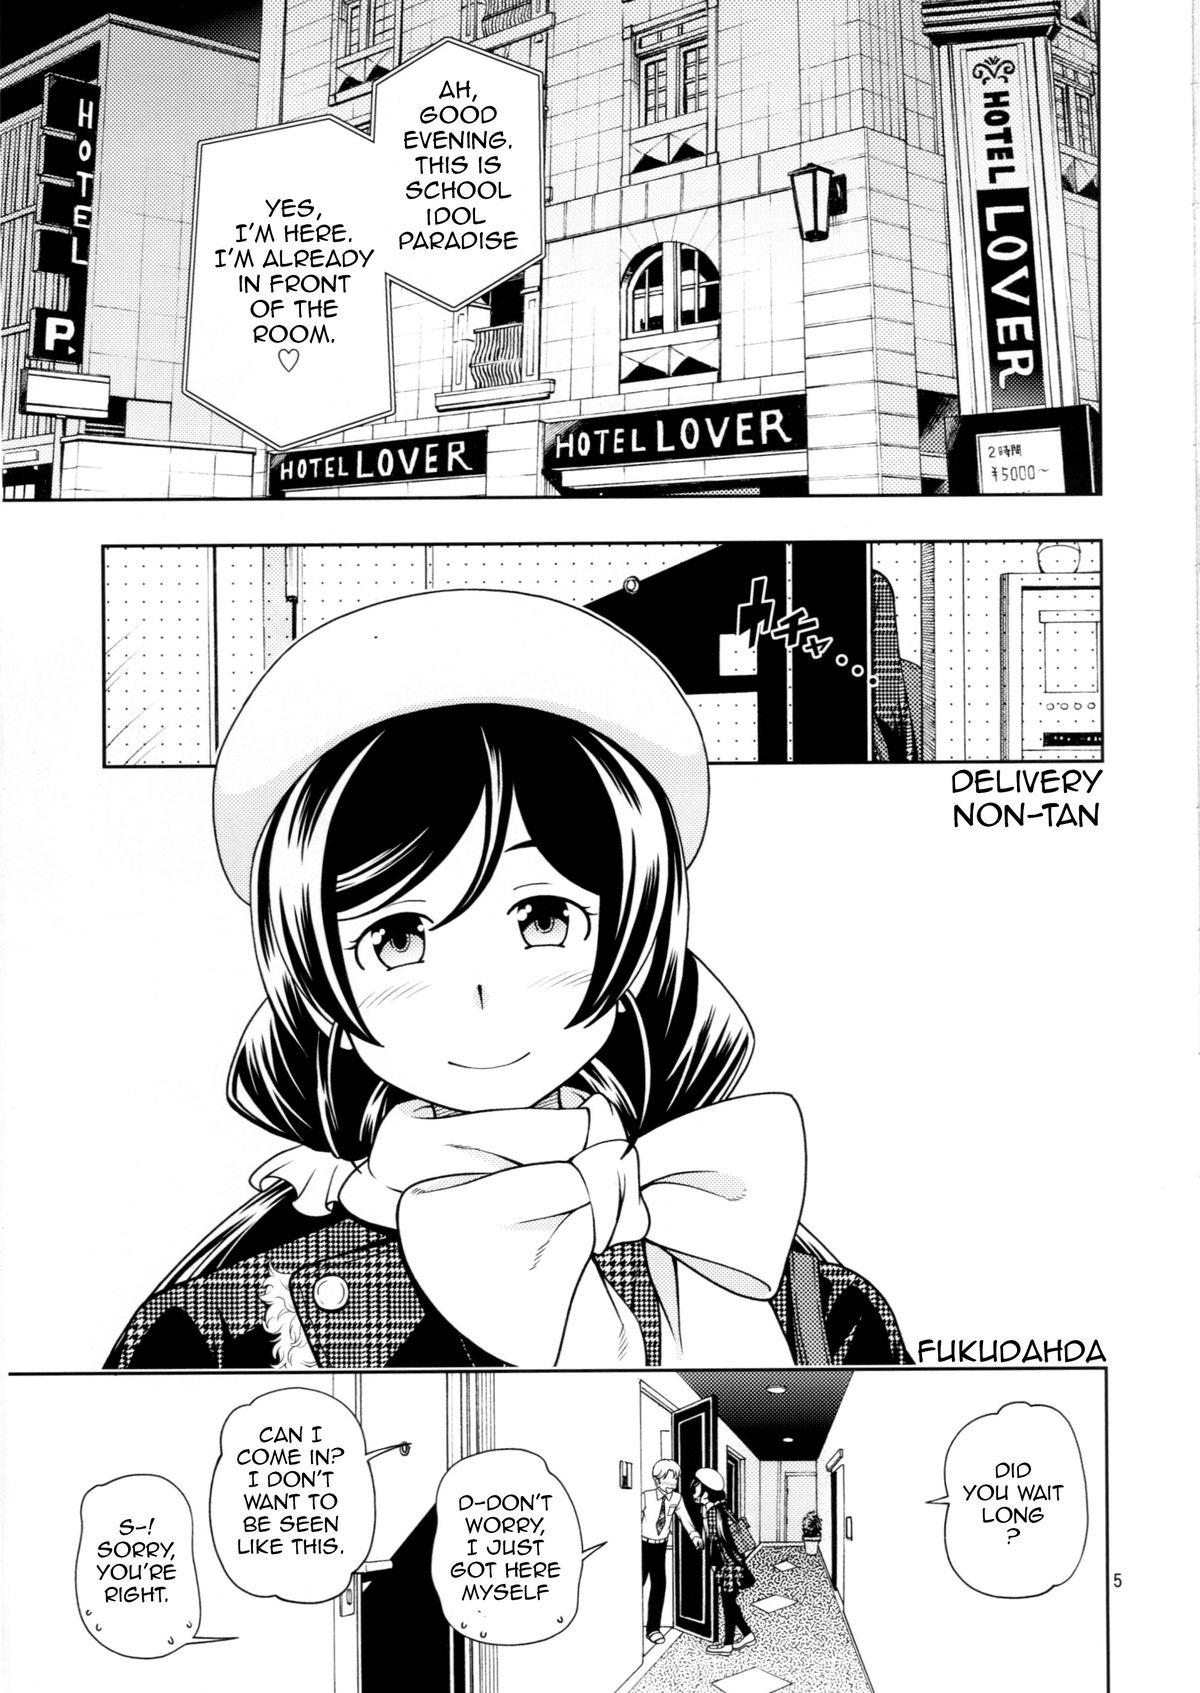 Vietnamese Delivery μ's - Love live Romance - Page 4